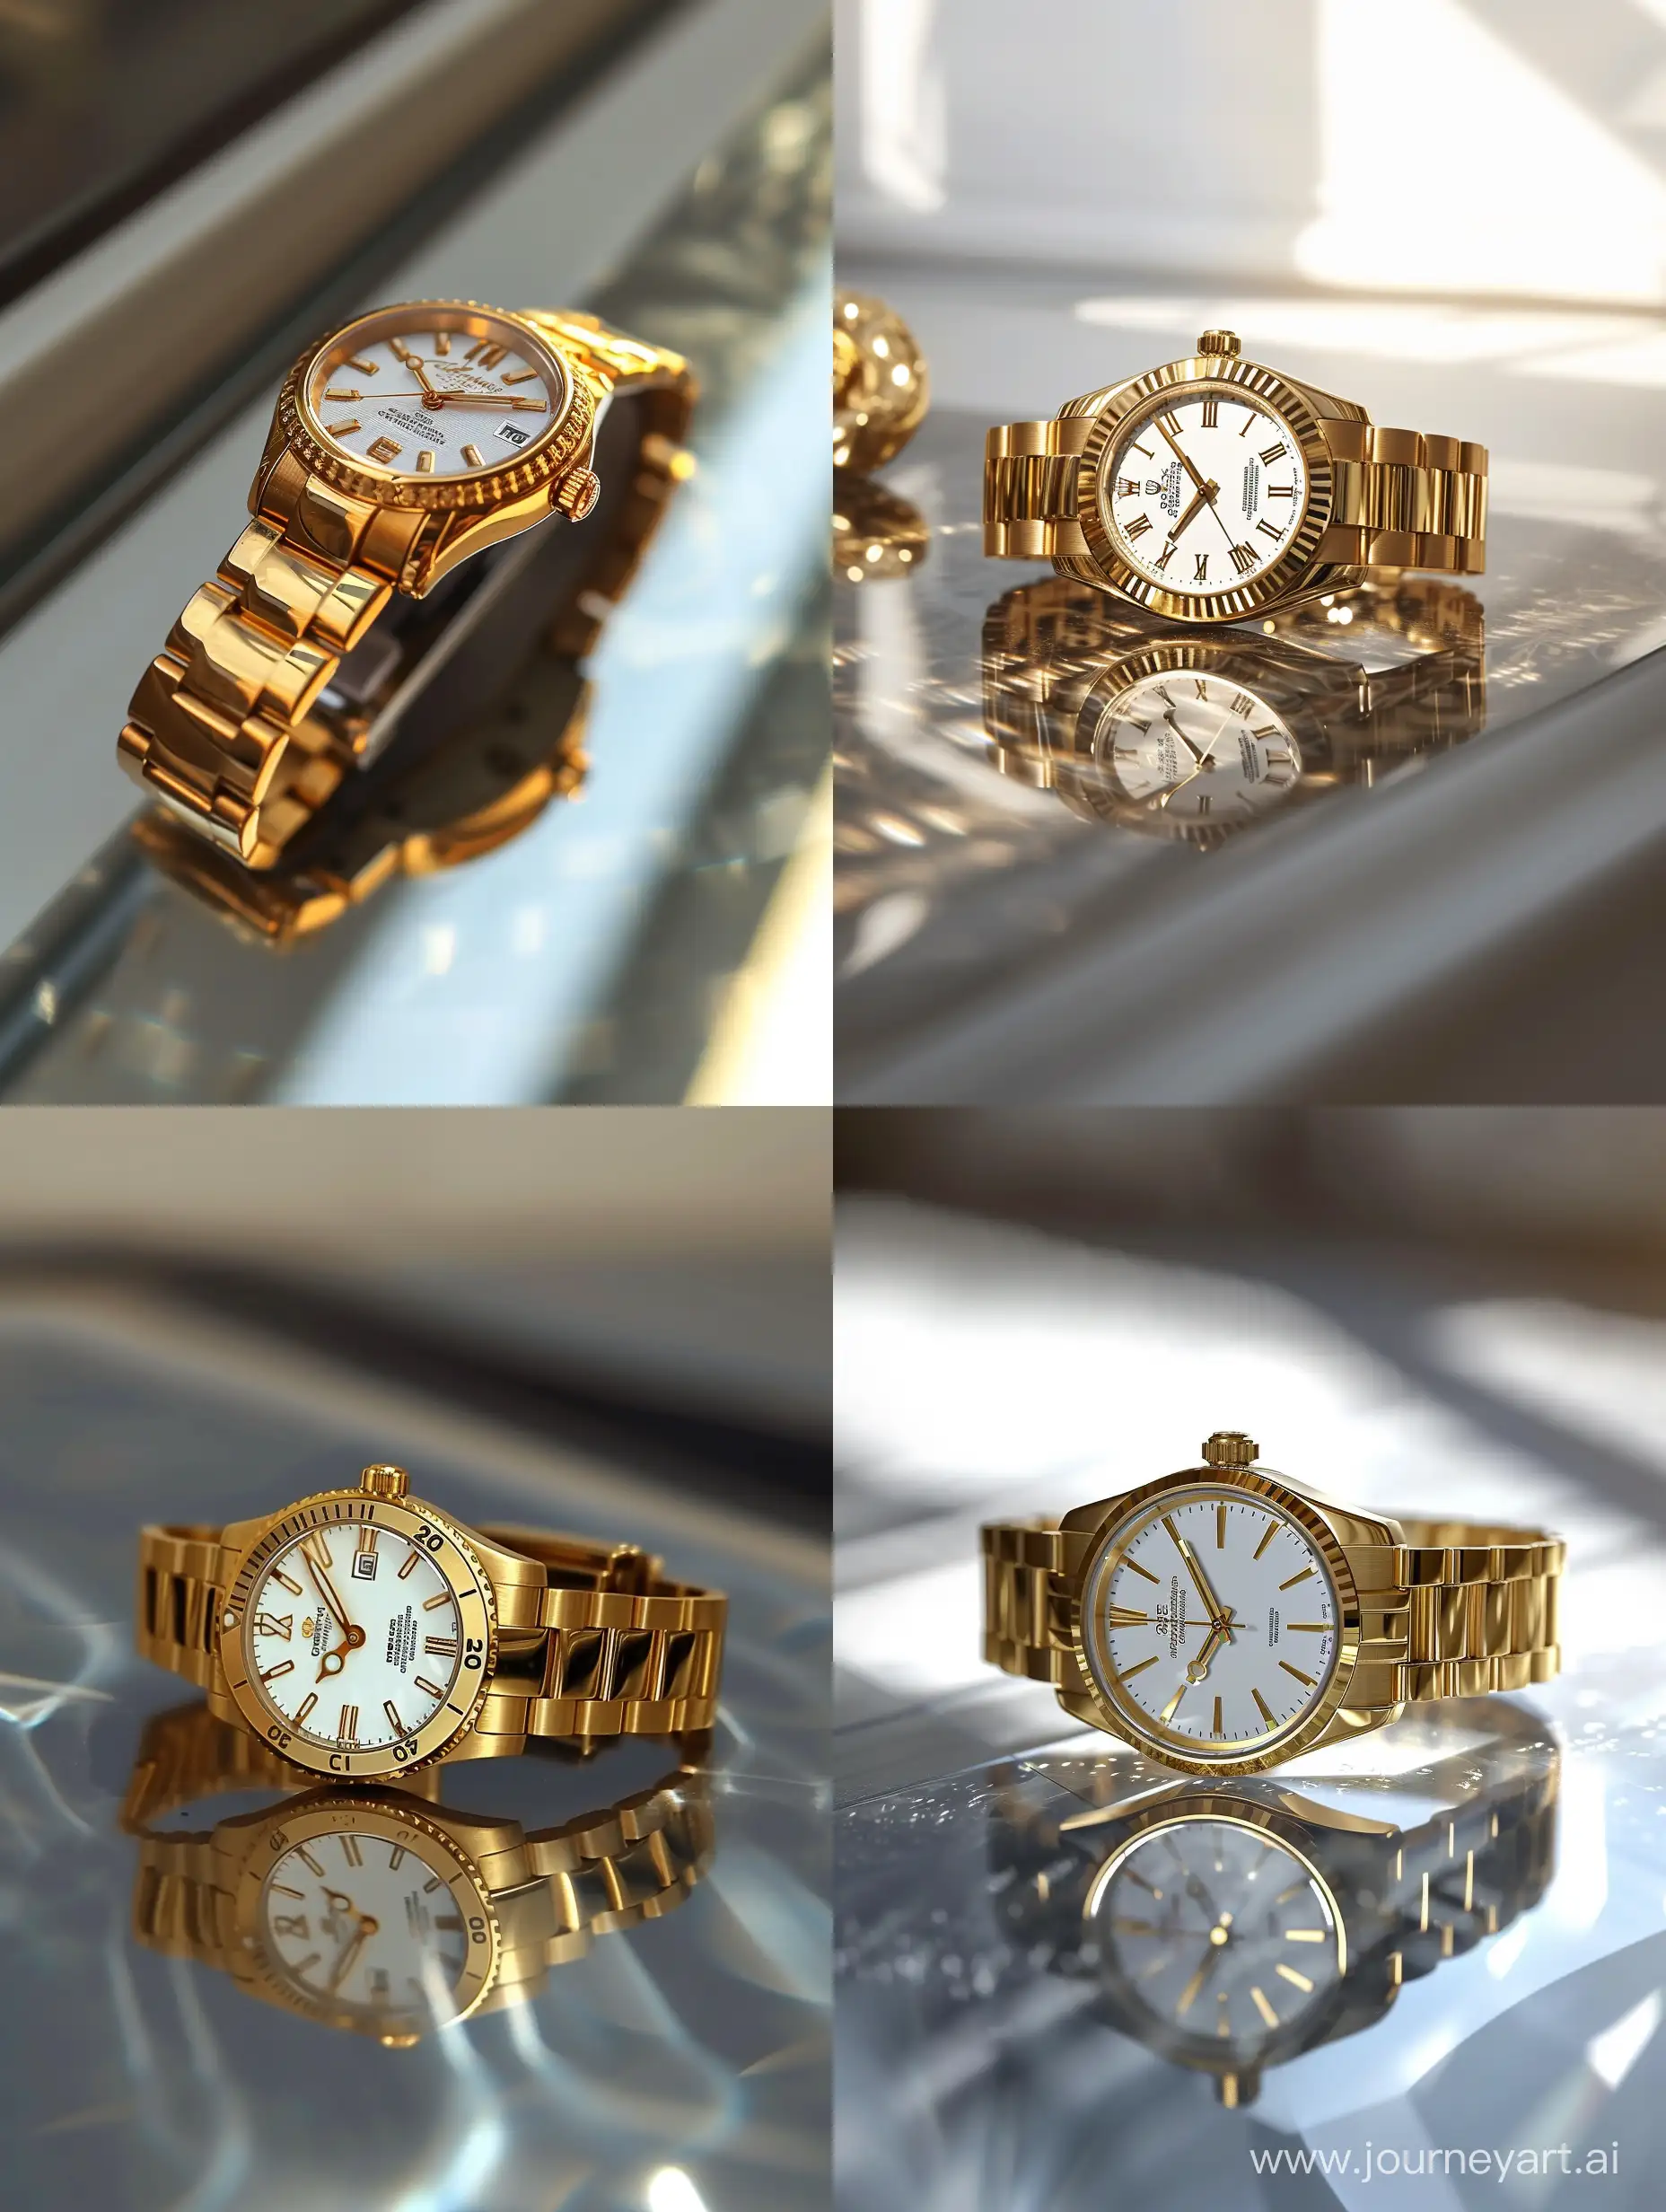 Luxurious-Gold-Wristwatch-with-Intricate-Detailing-on-Reflective-Surface